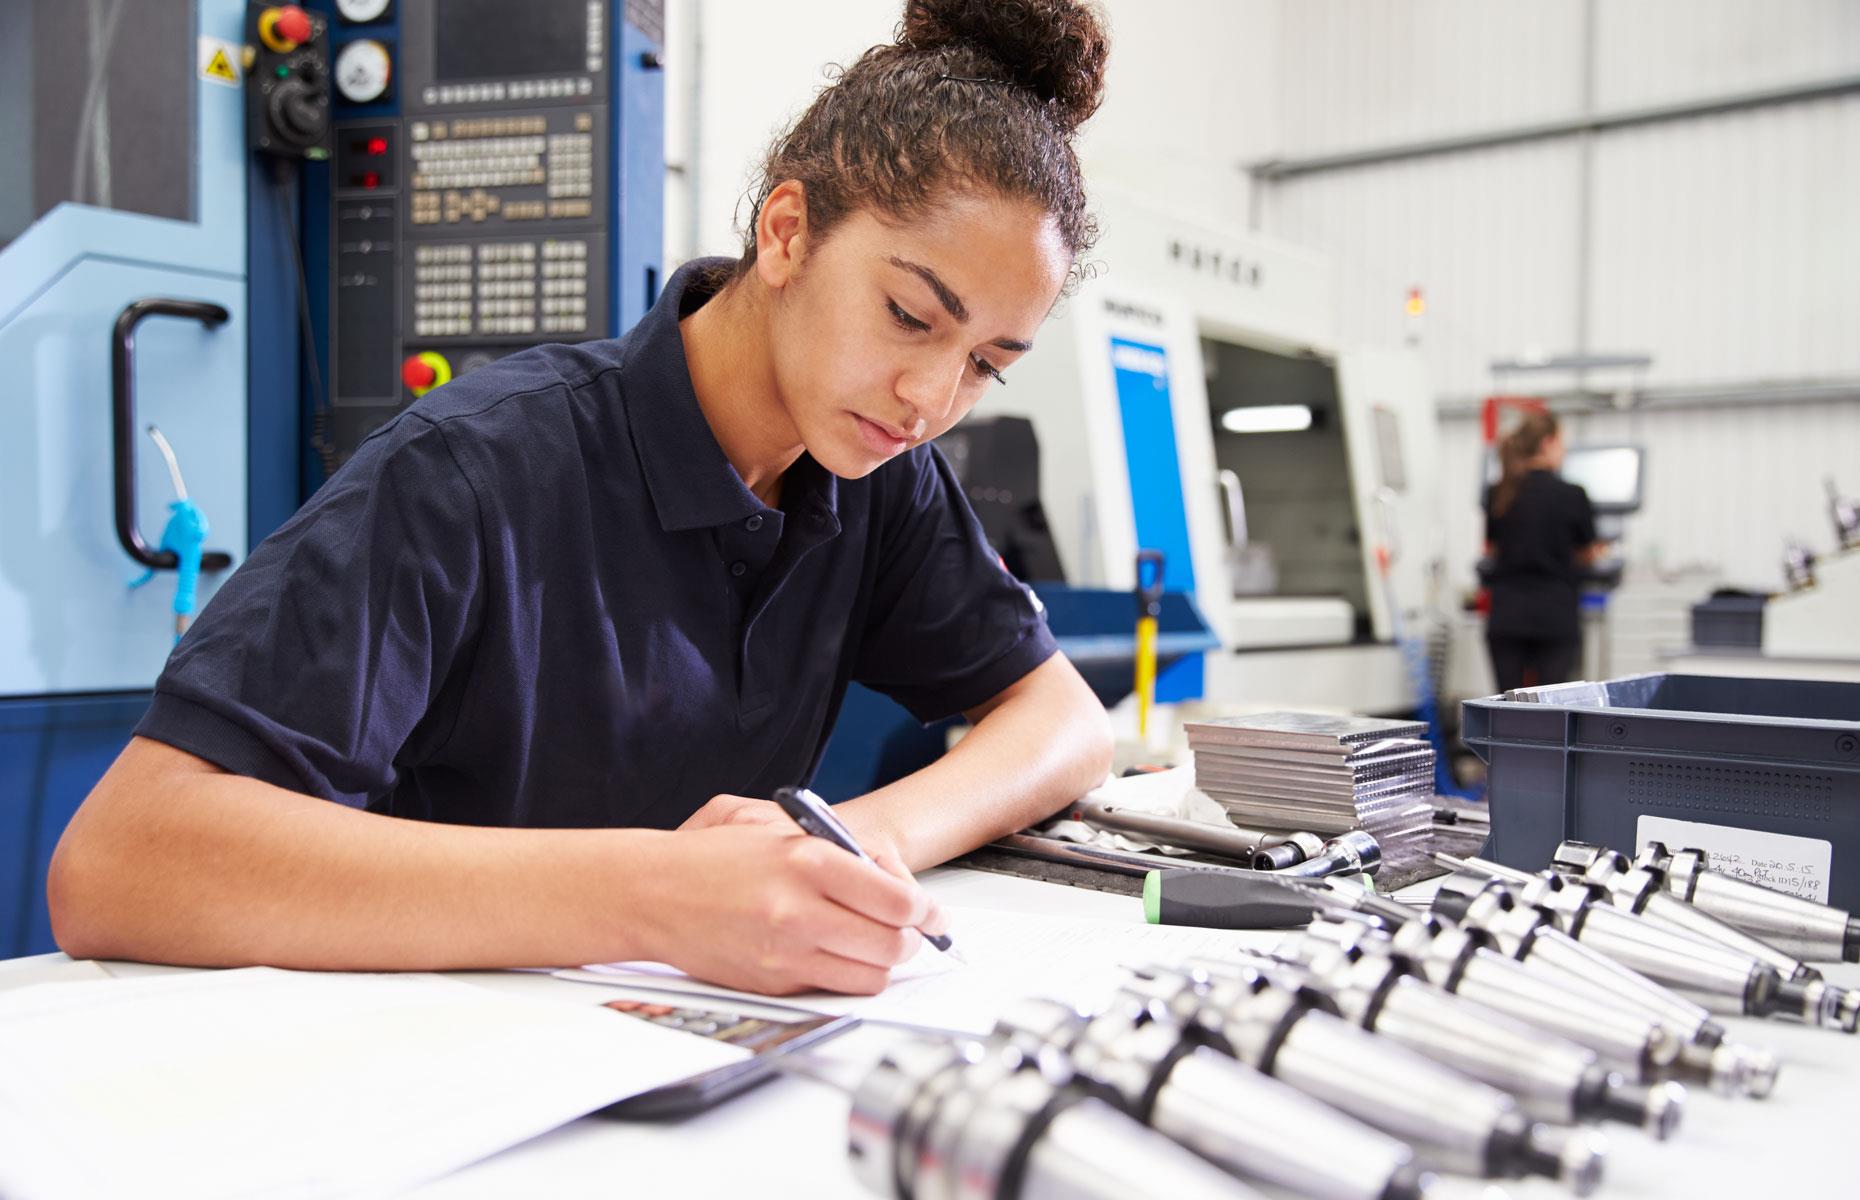 And the jobs where women earn much less than men...Industrial engineers: 25% less